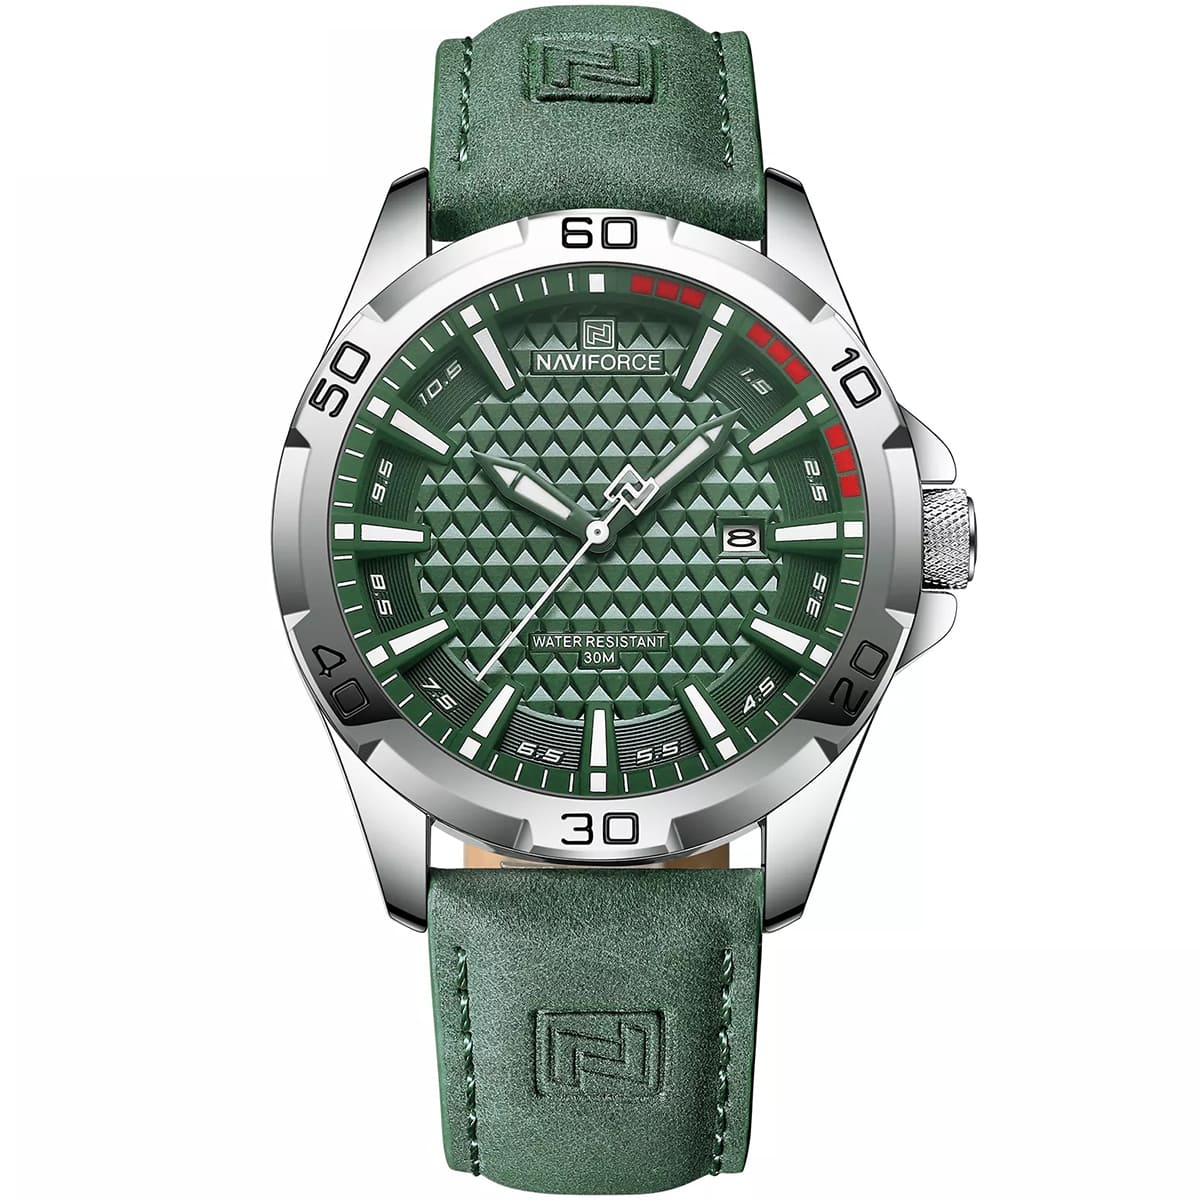 nf8023-s-gn-gn-original-naviforce-watch-men-green-dial-leather-green-strap-quartz-battery-analog-water-resistant-30m-for-dream